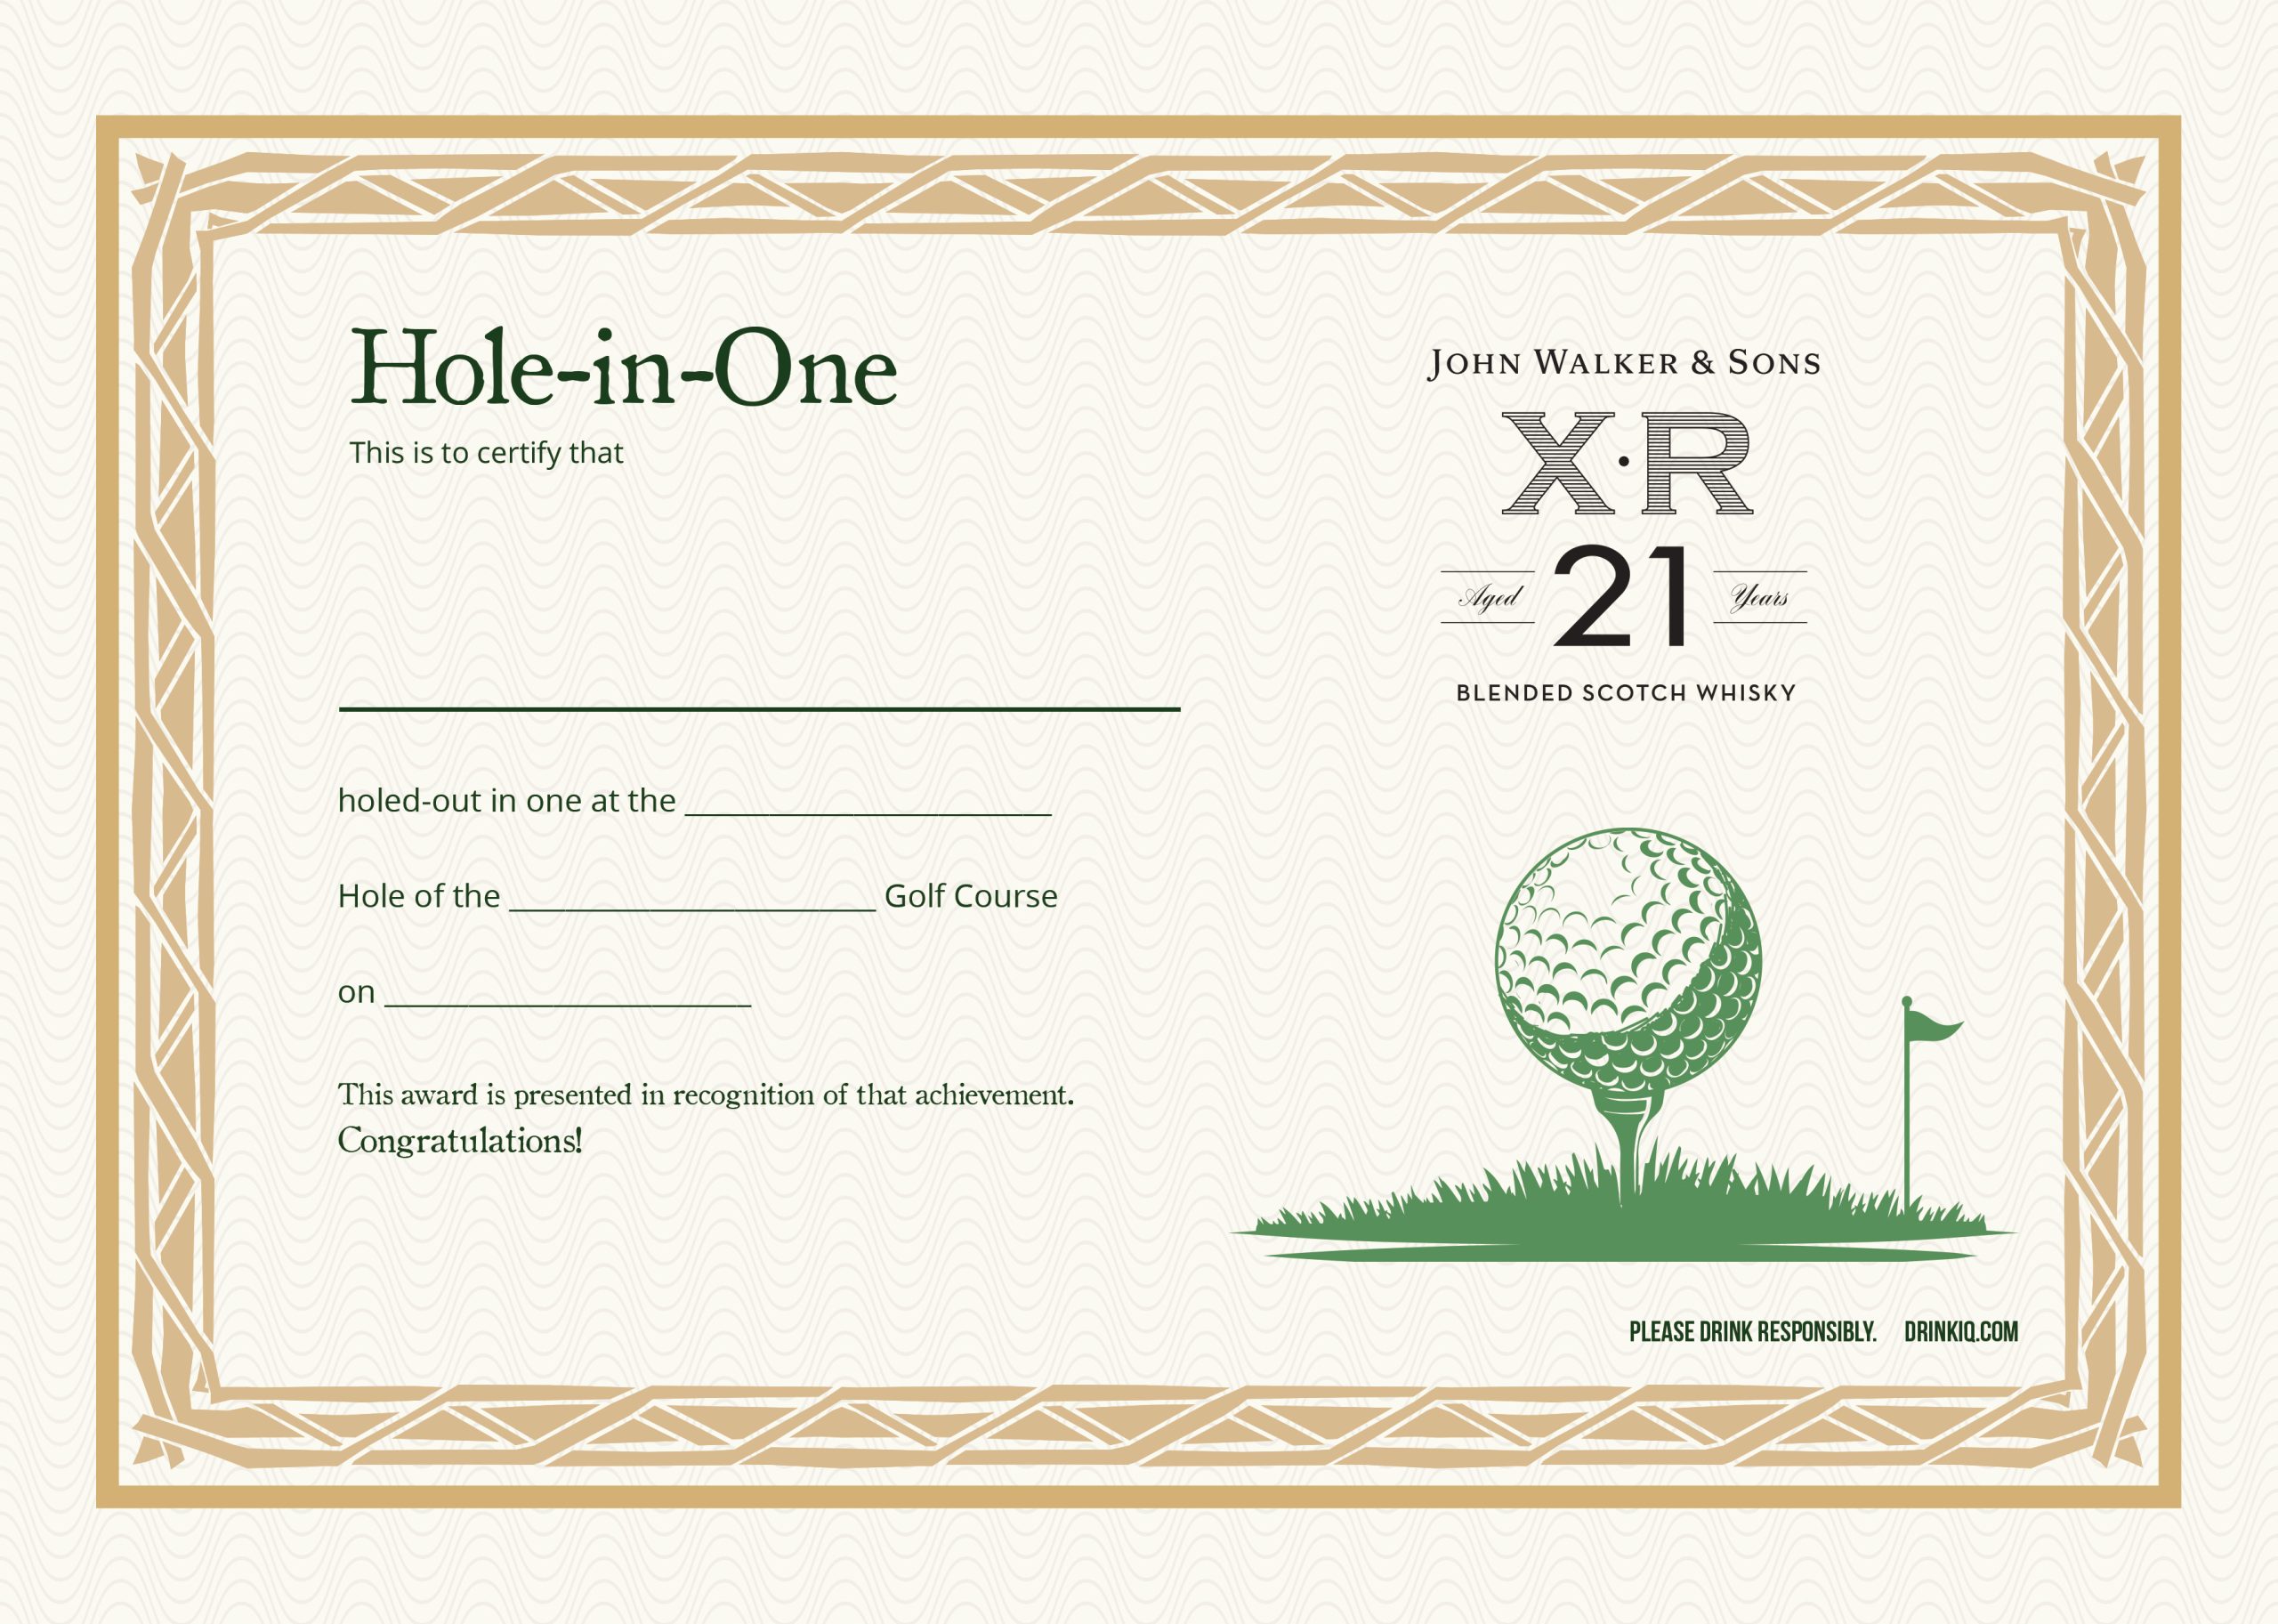 johnnie-walker-xr21-hole-in-one-prize-promotion-sembawang-country-club